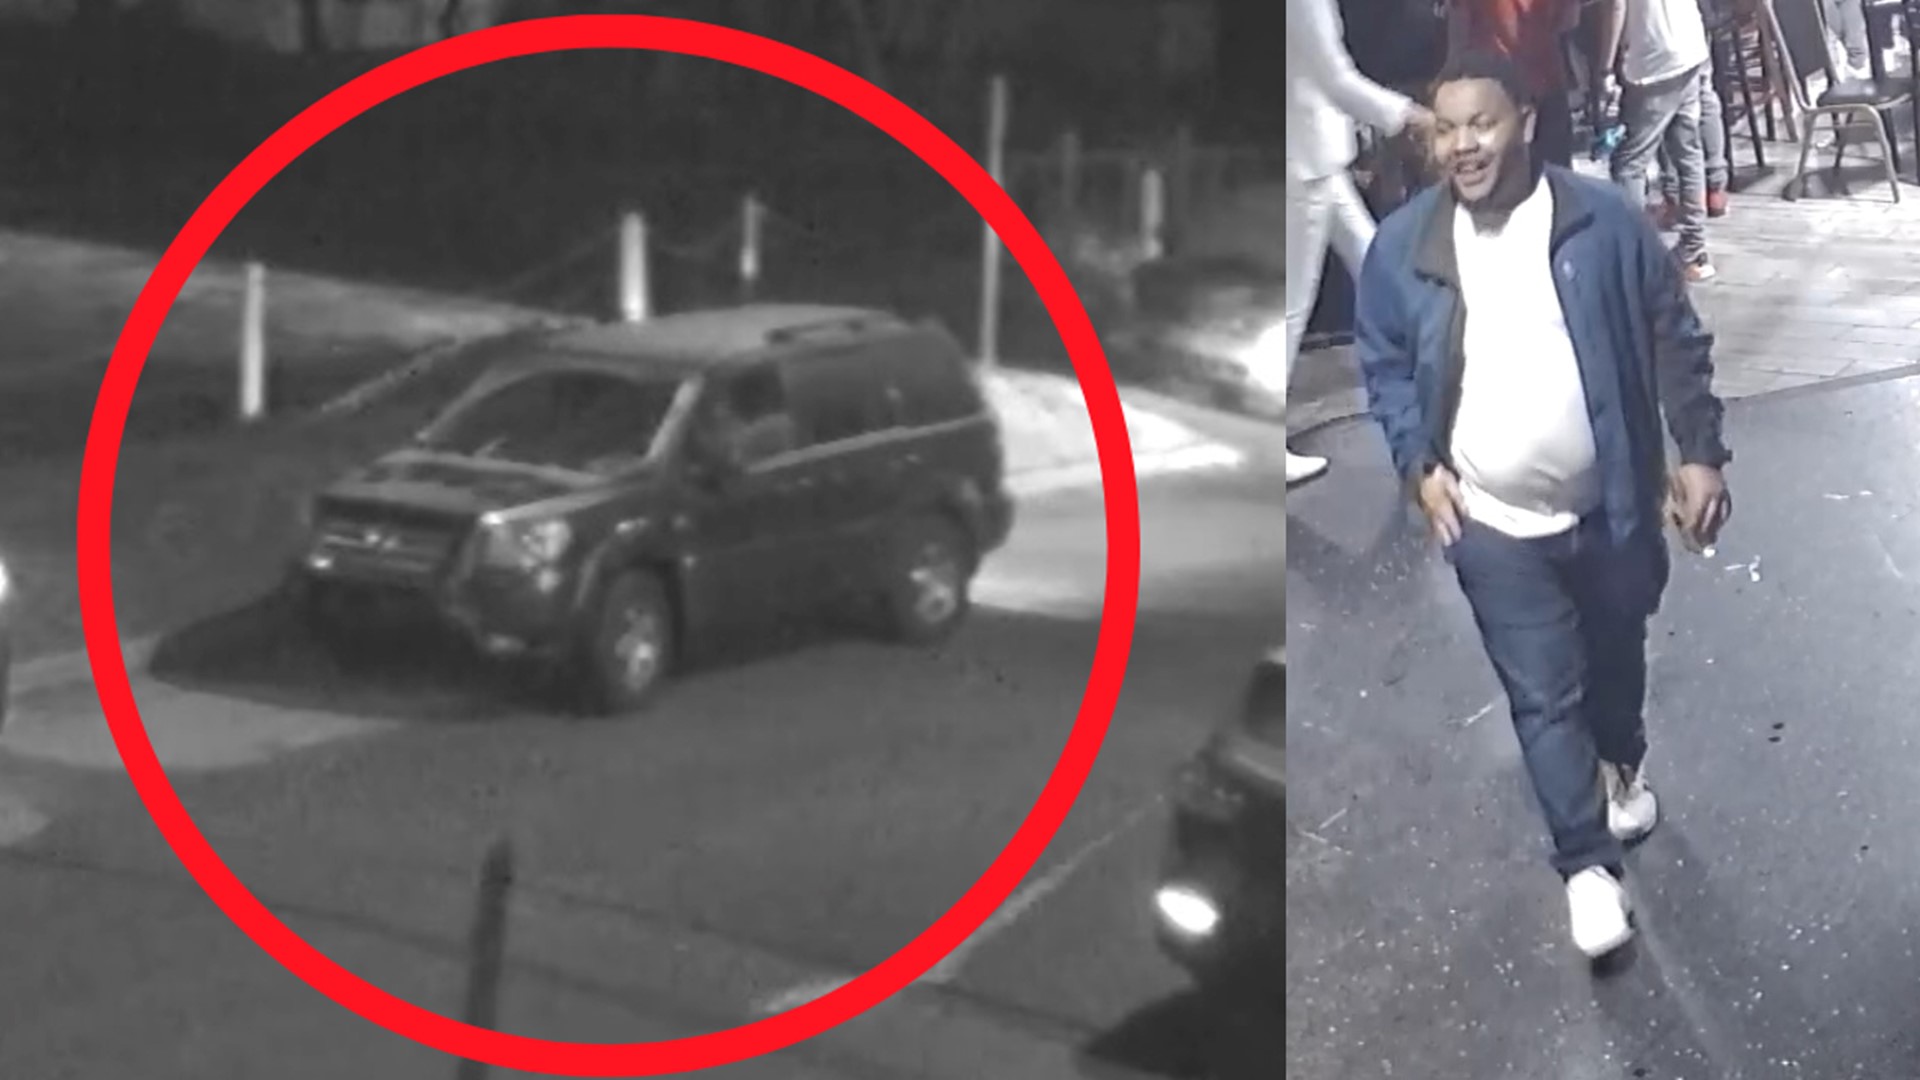 An SUV struck 53-year-old Robert Delgato earlier this month and left him for dead. Detectives are sharing surveillance photos of a person of interest in the case.